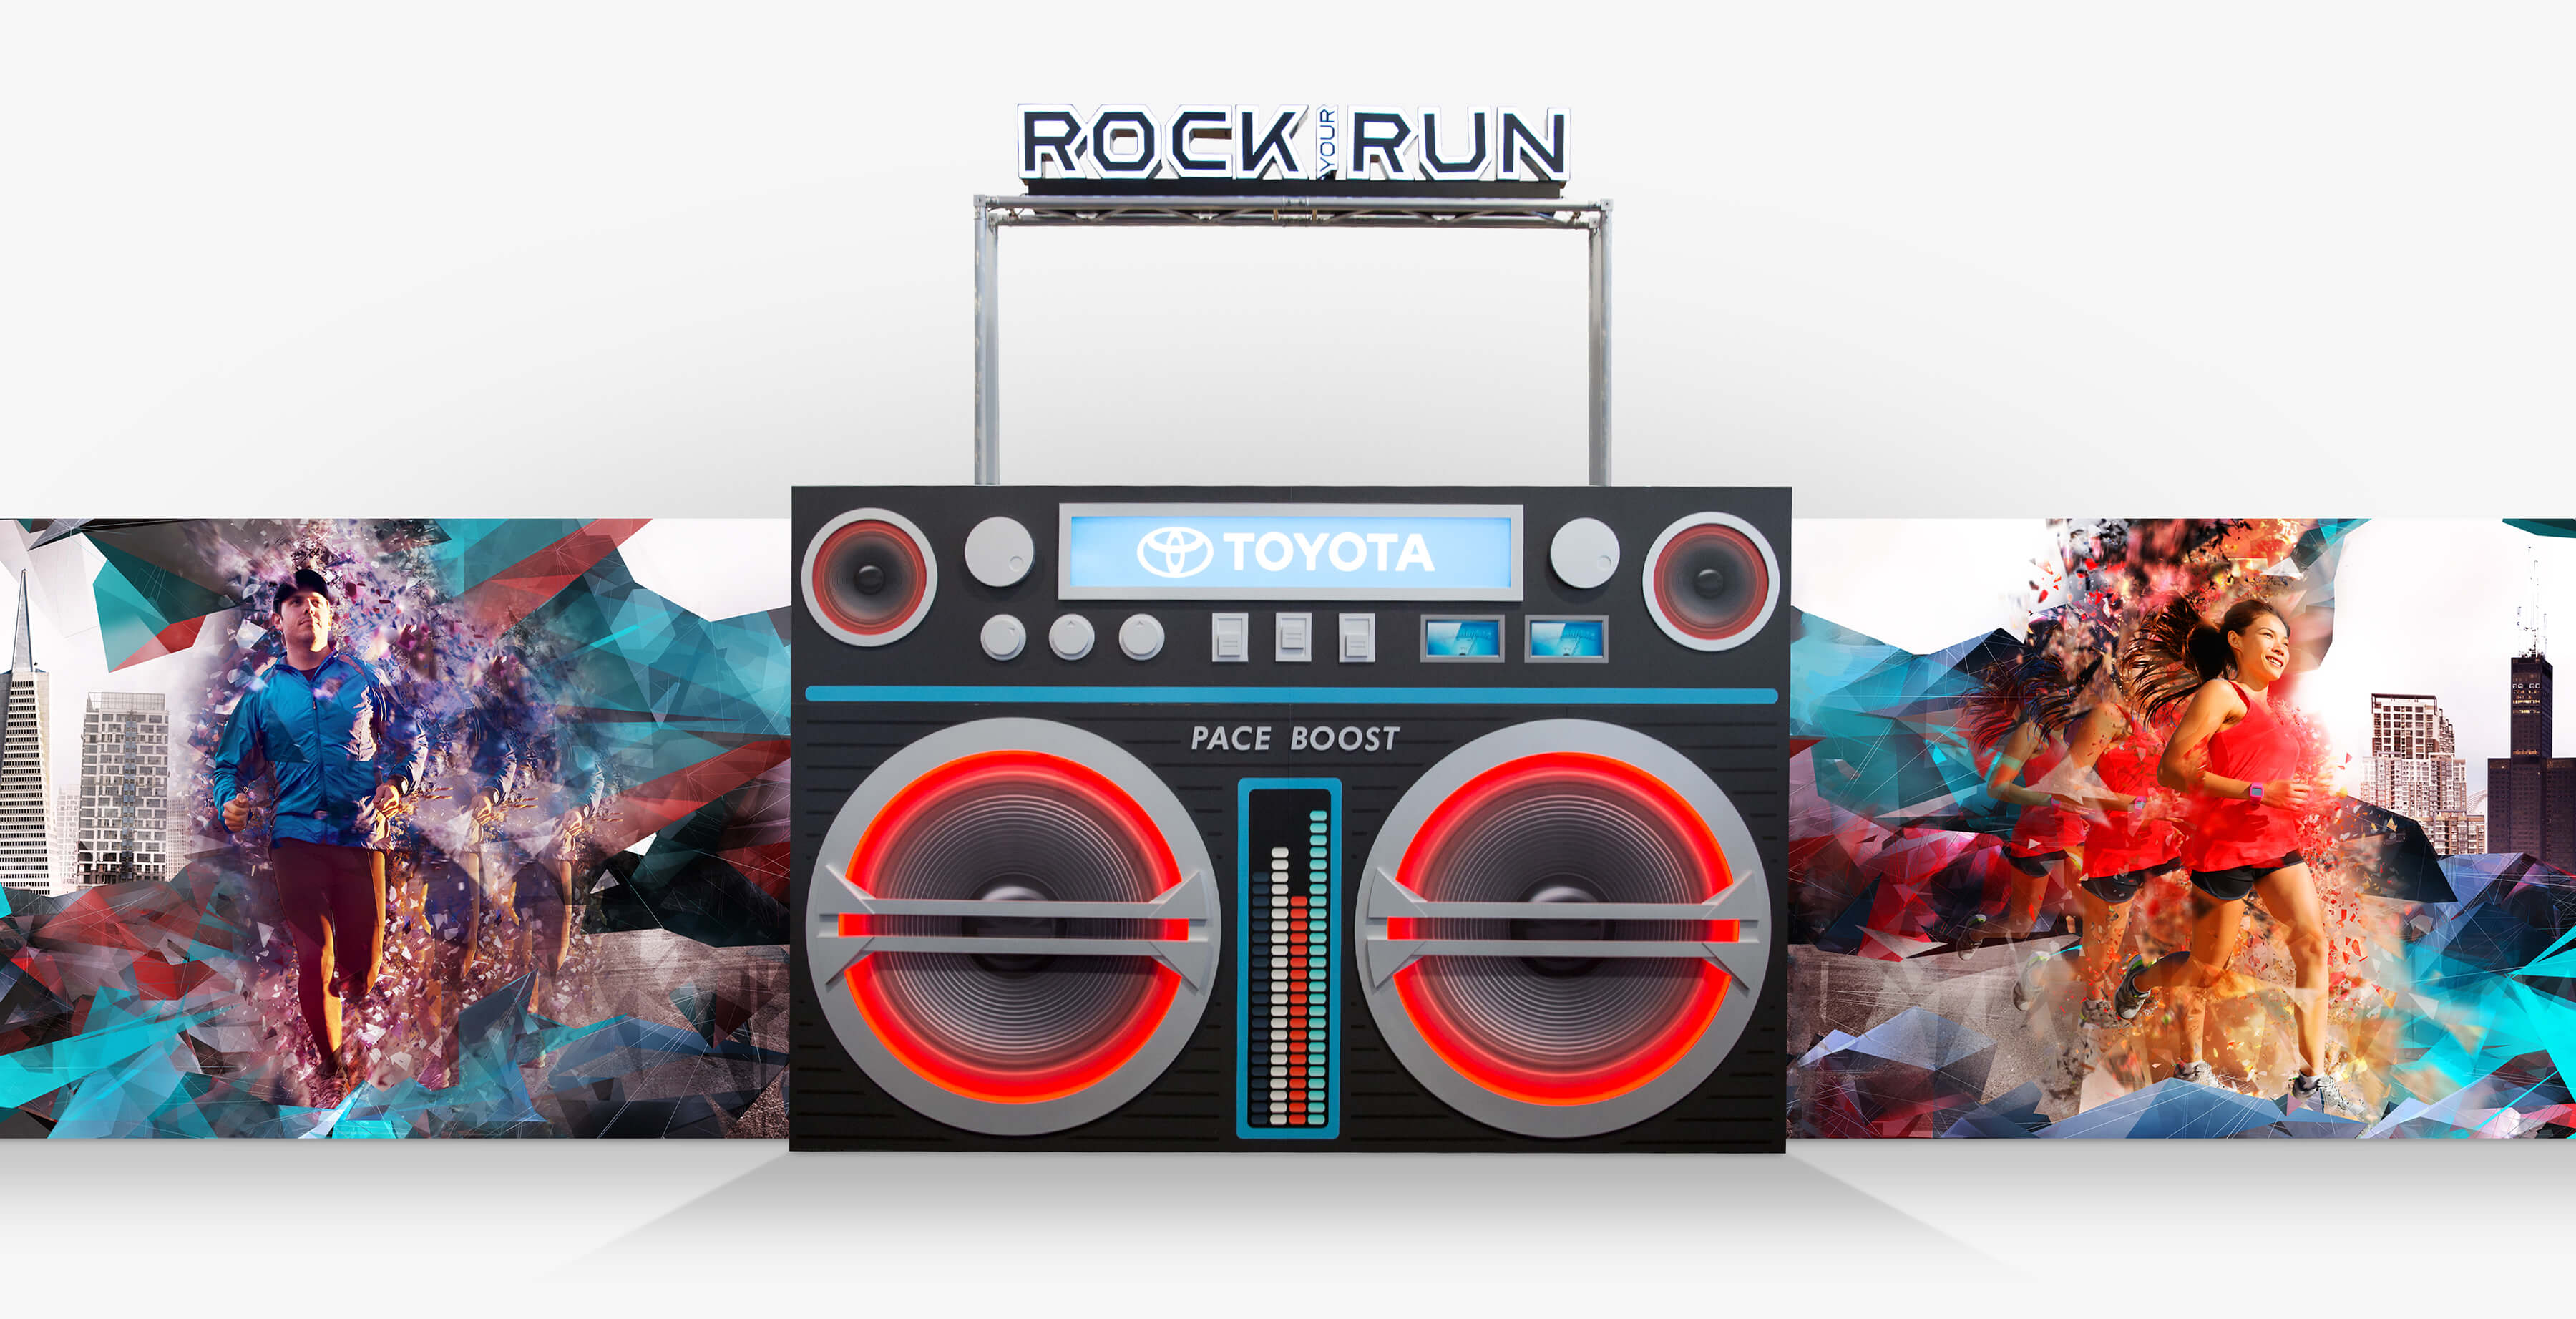 Toyota Rock Your Run back wall middle panel featuring a giant boom box, a male and female runner, dynamic geometric fragments, and city scape.